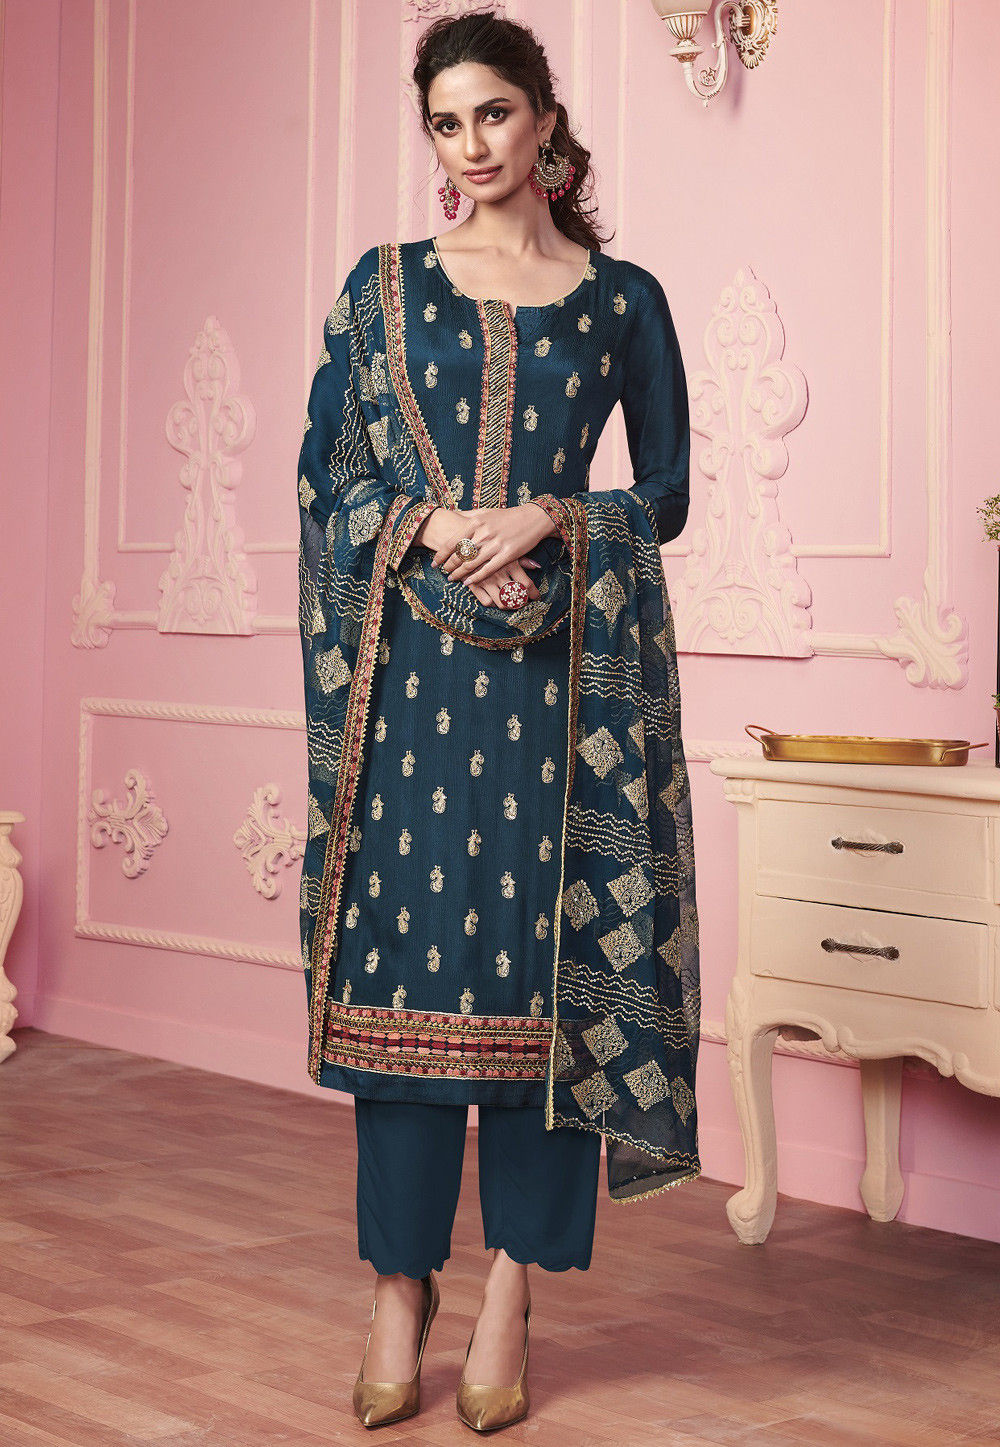 Embroidered Chinon Chiffon Pakistani Suit in Teal Blue : KCH7088